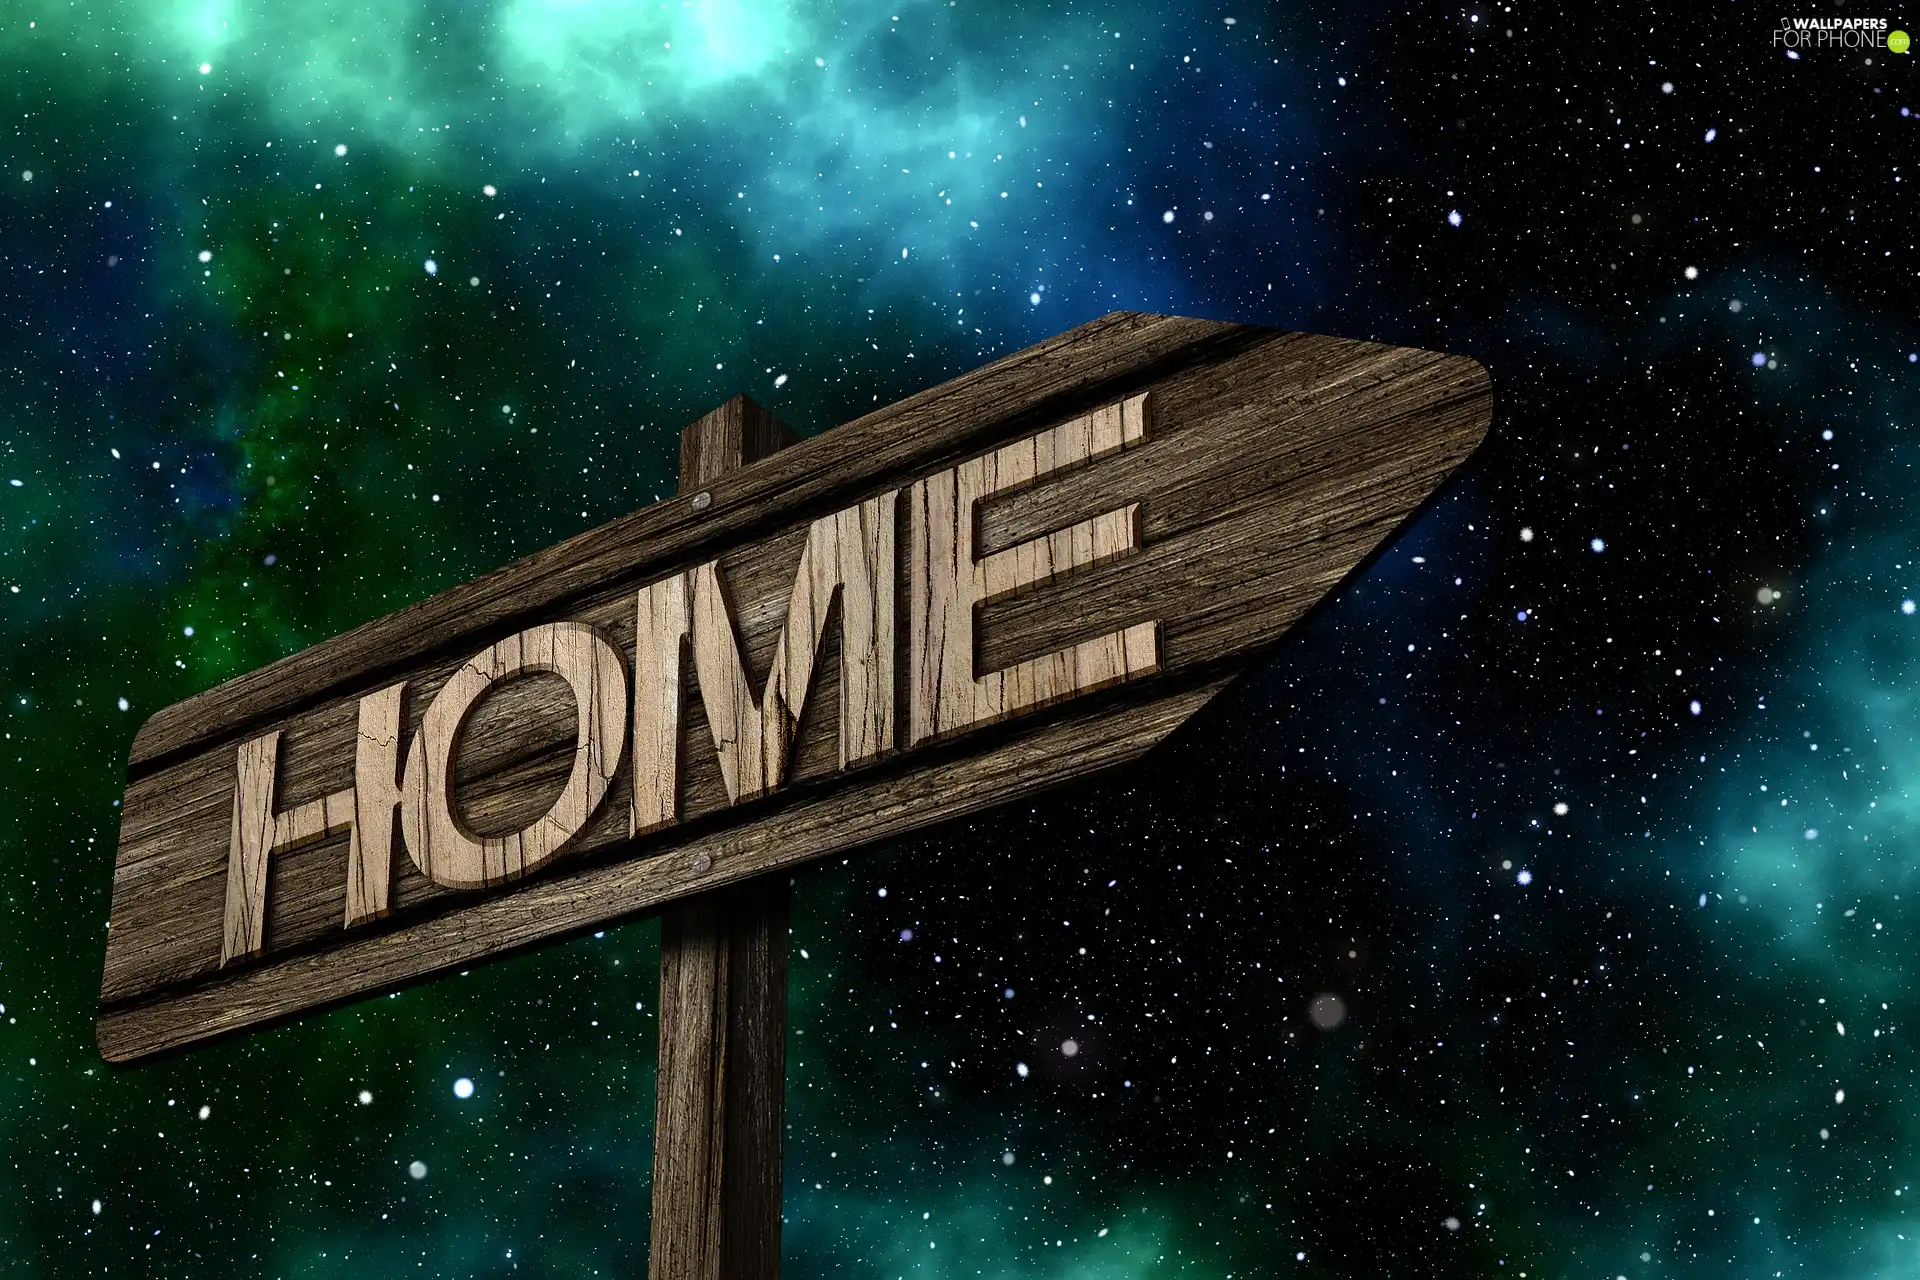 Sky, star, text, home, sign-post